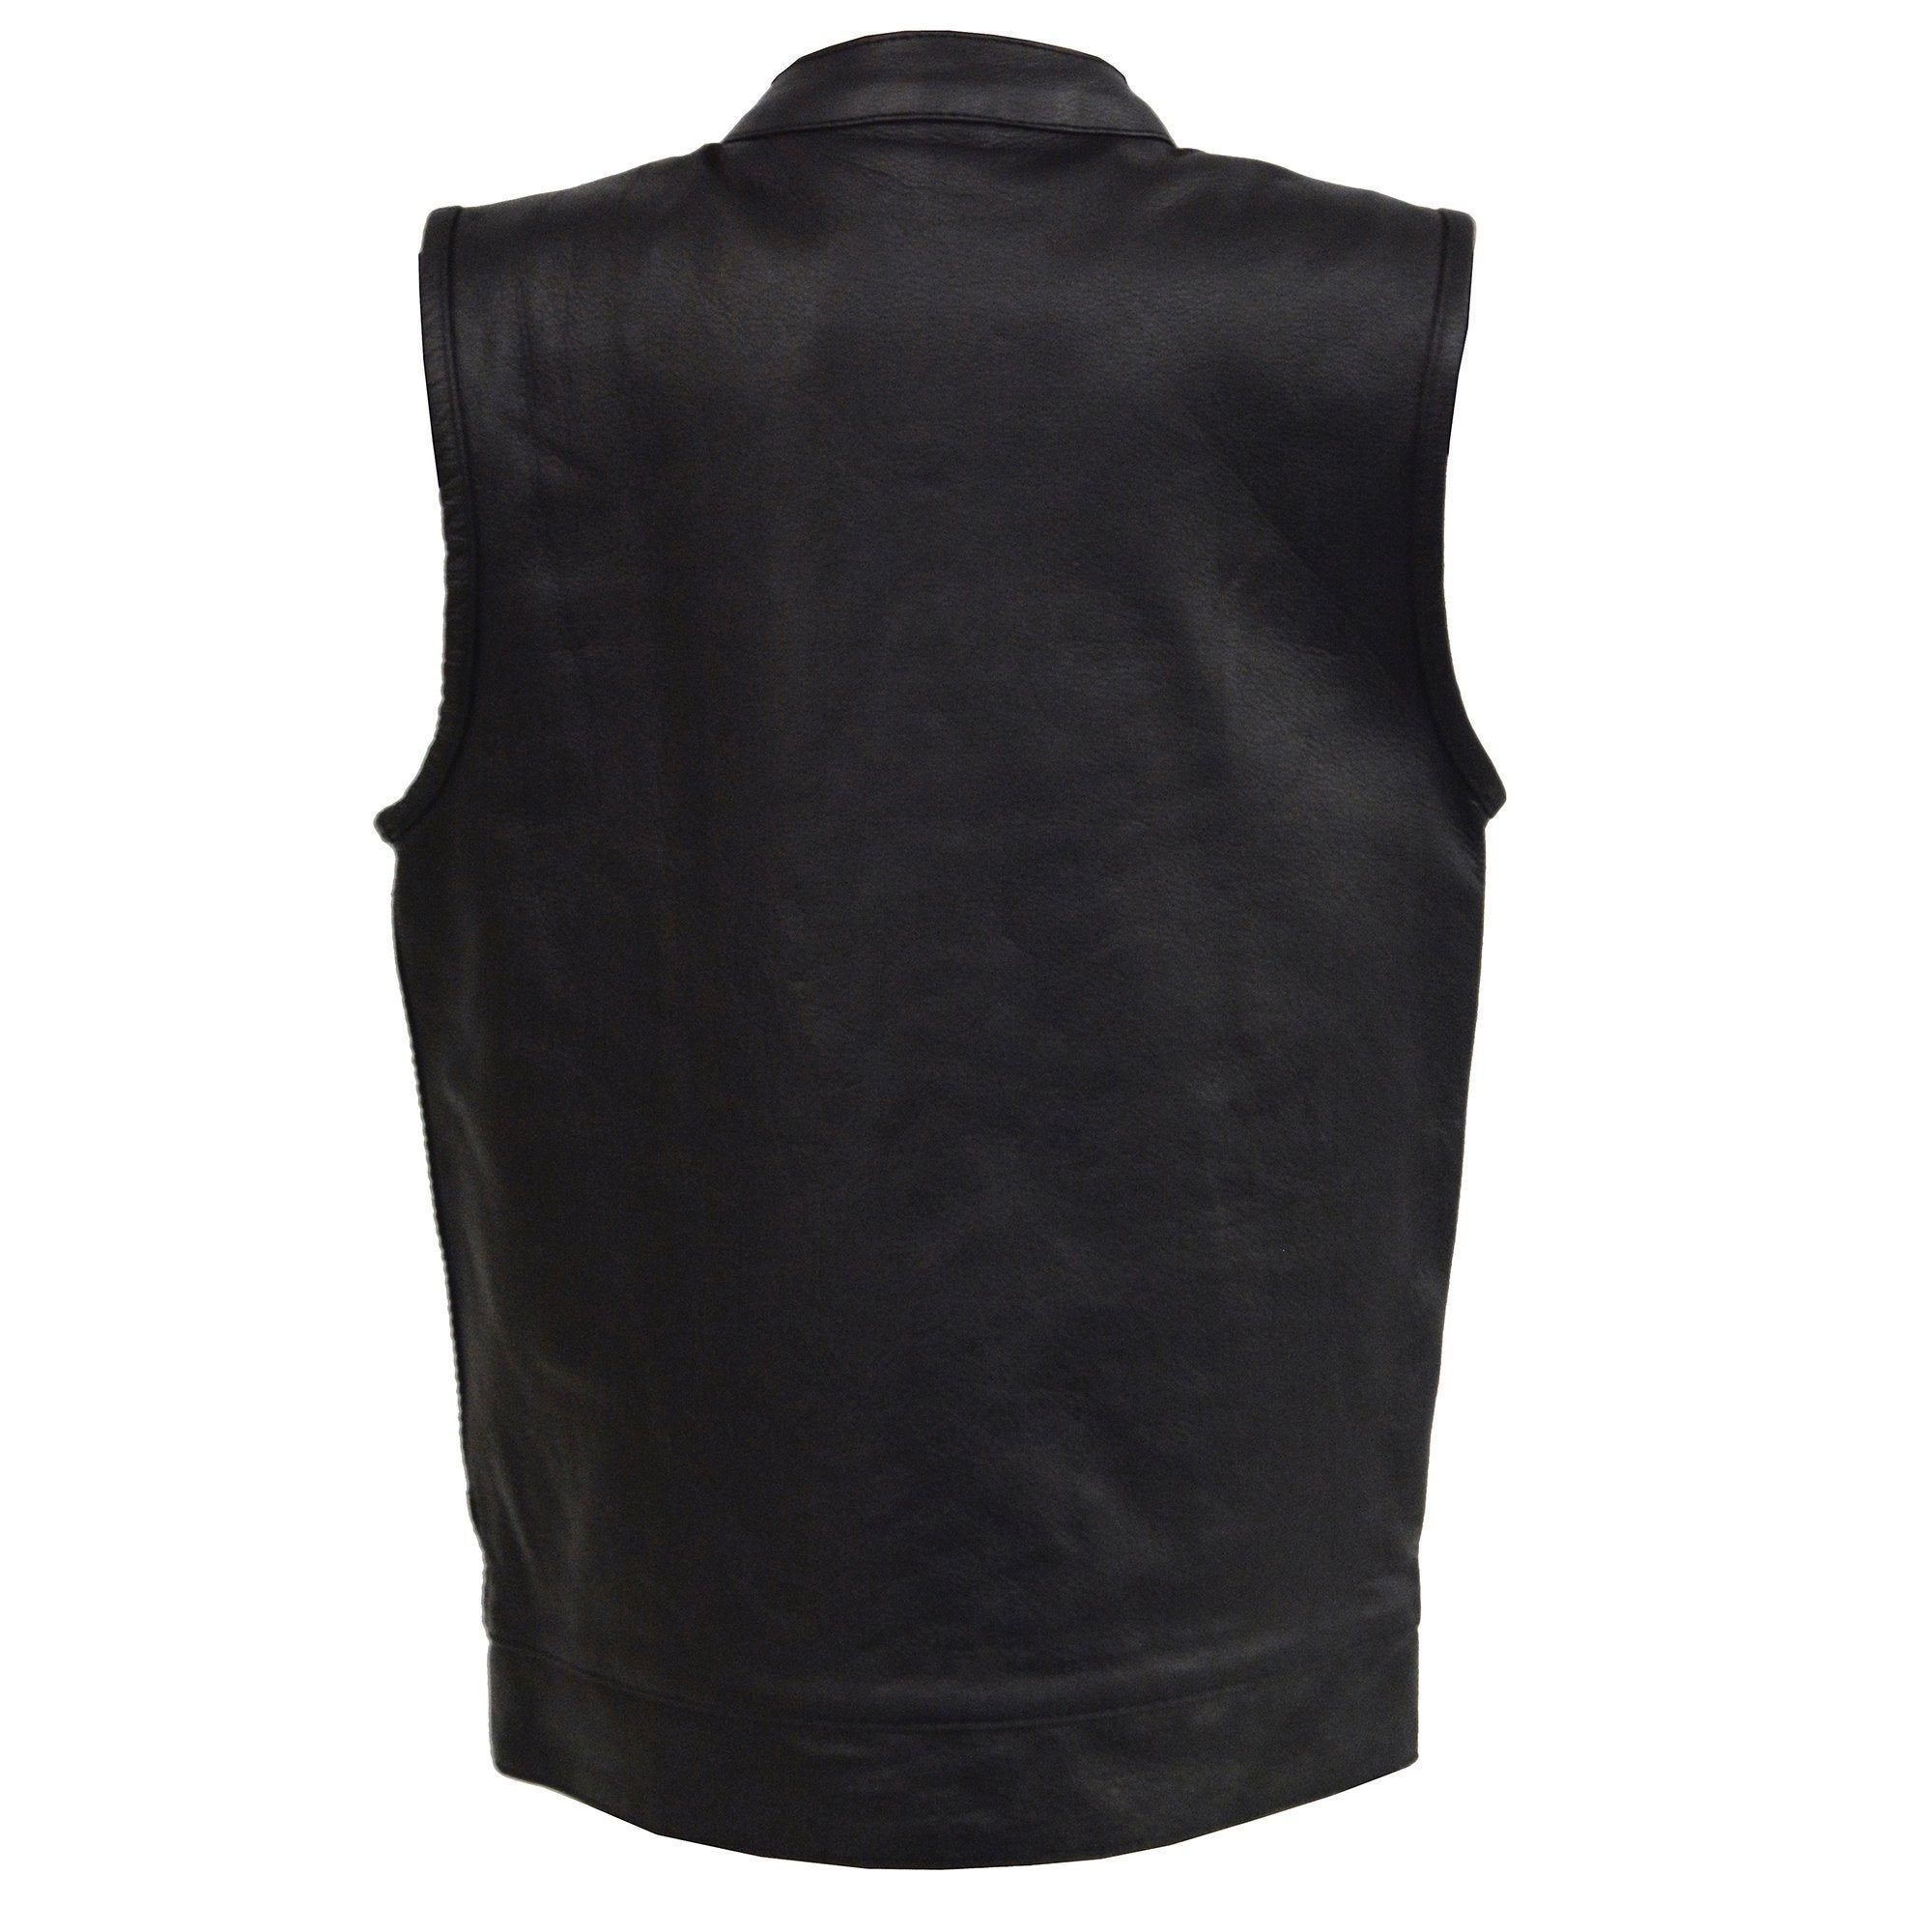 Milwaukee Leather LKY3850 Youth Size Open Neck Snap and Zip Front Club Style Leather Vest - Milwaukee Leather Youth Leather Vests